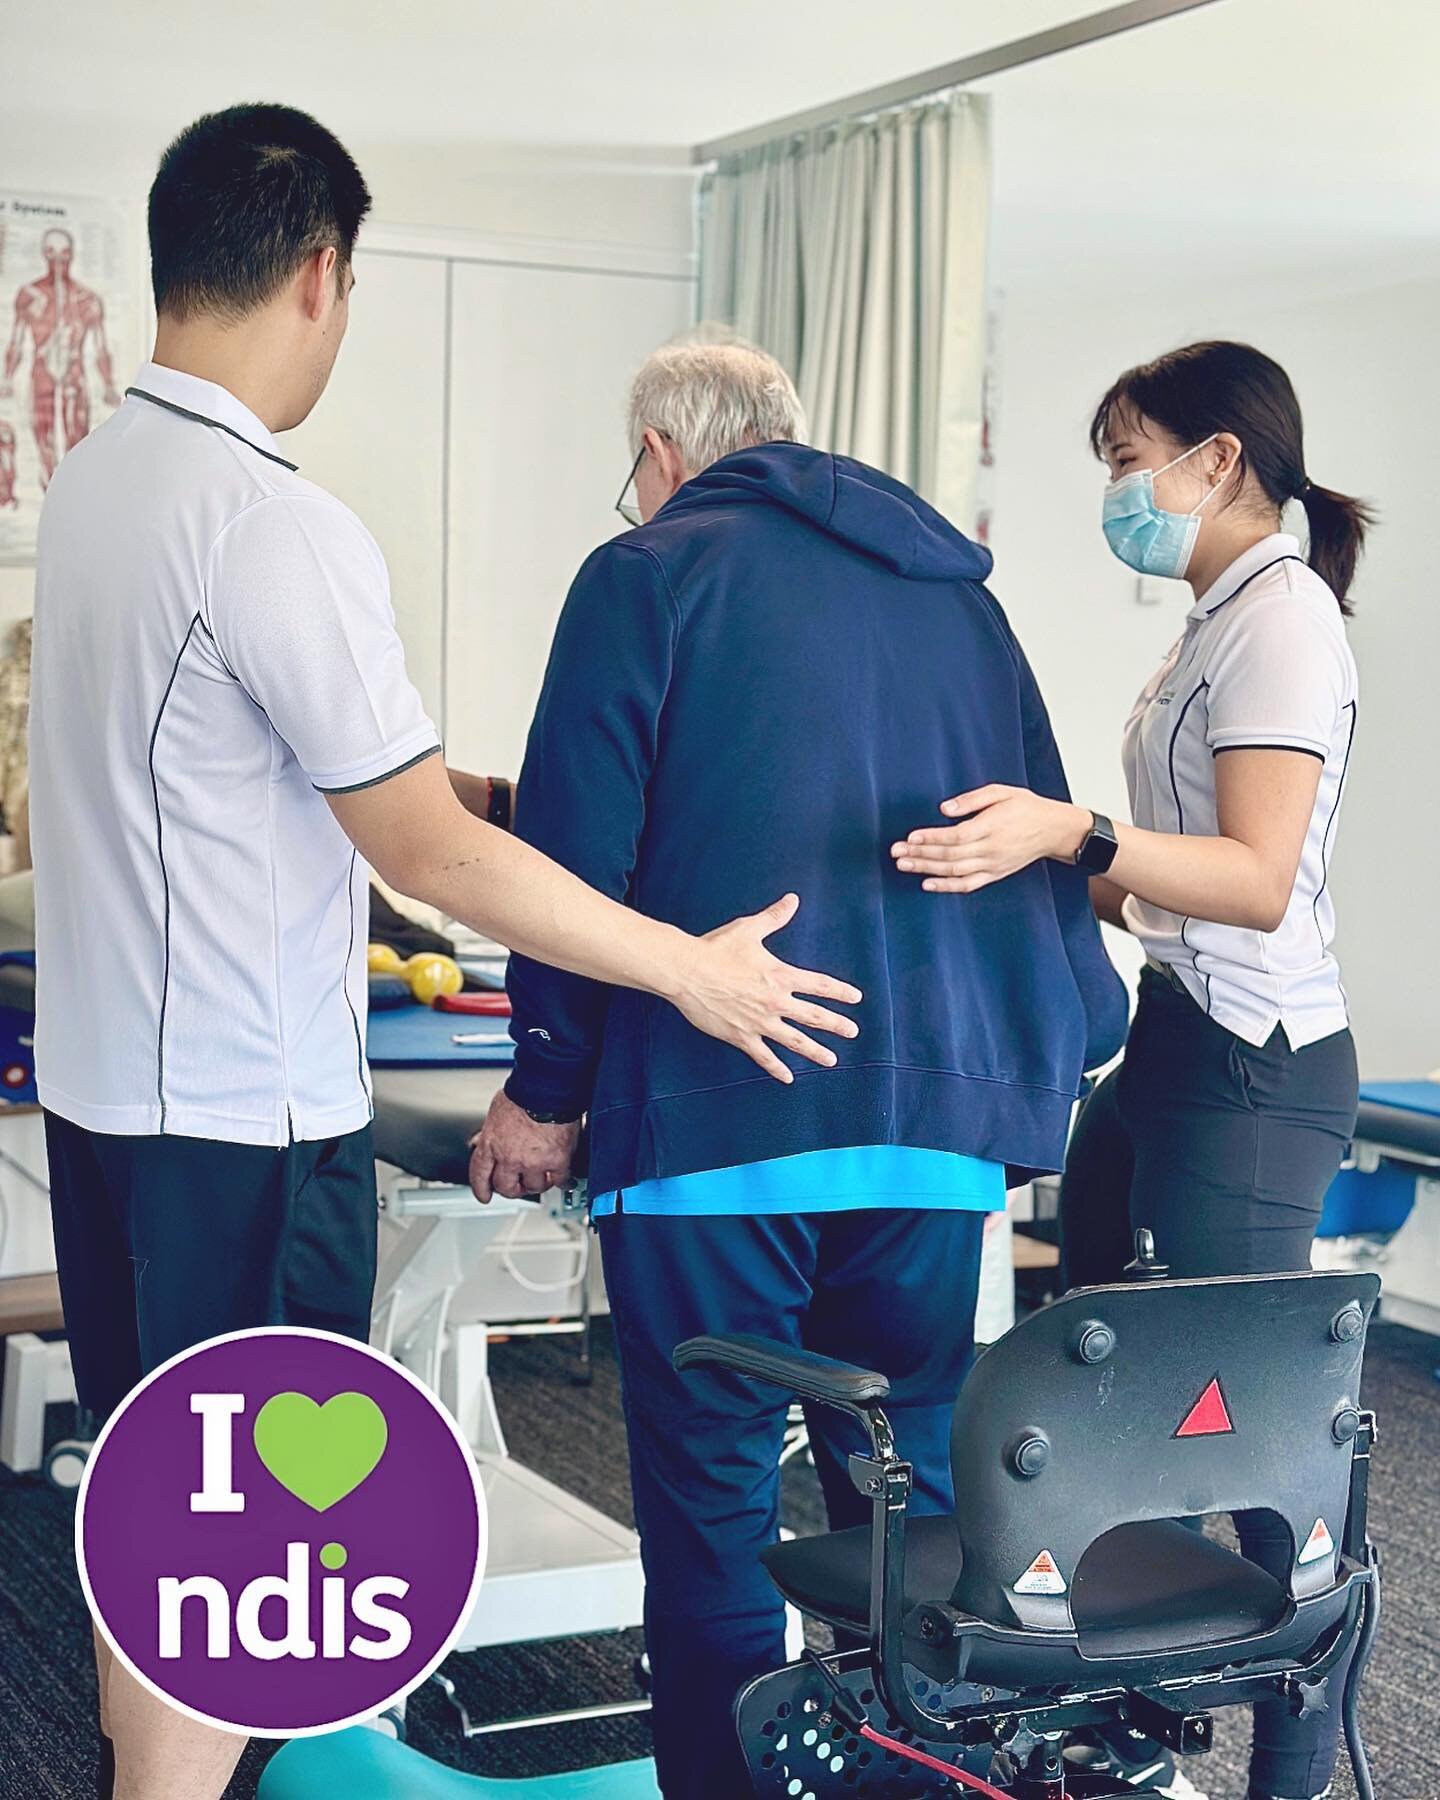 Sydney Health Physiotherapy is now proudly an NDIS approved provider! 

Whatever your disability may be our therapists are here with you every step of the way. 

#physiotherapy #hurstville #hurstvillesydney #hurstvillephysiotherapy #ndis #ndisprovide